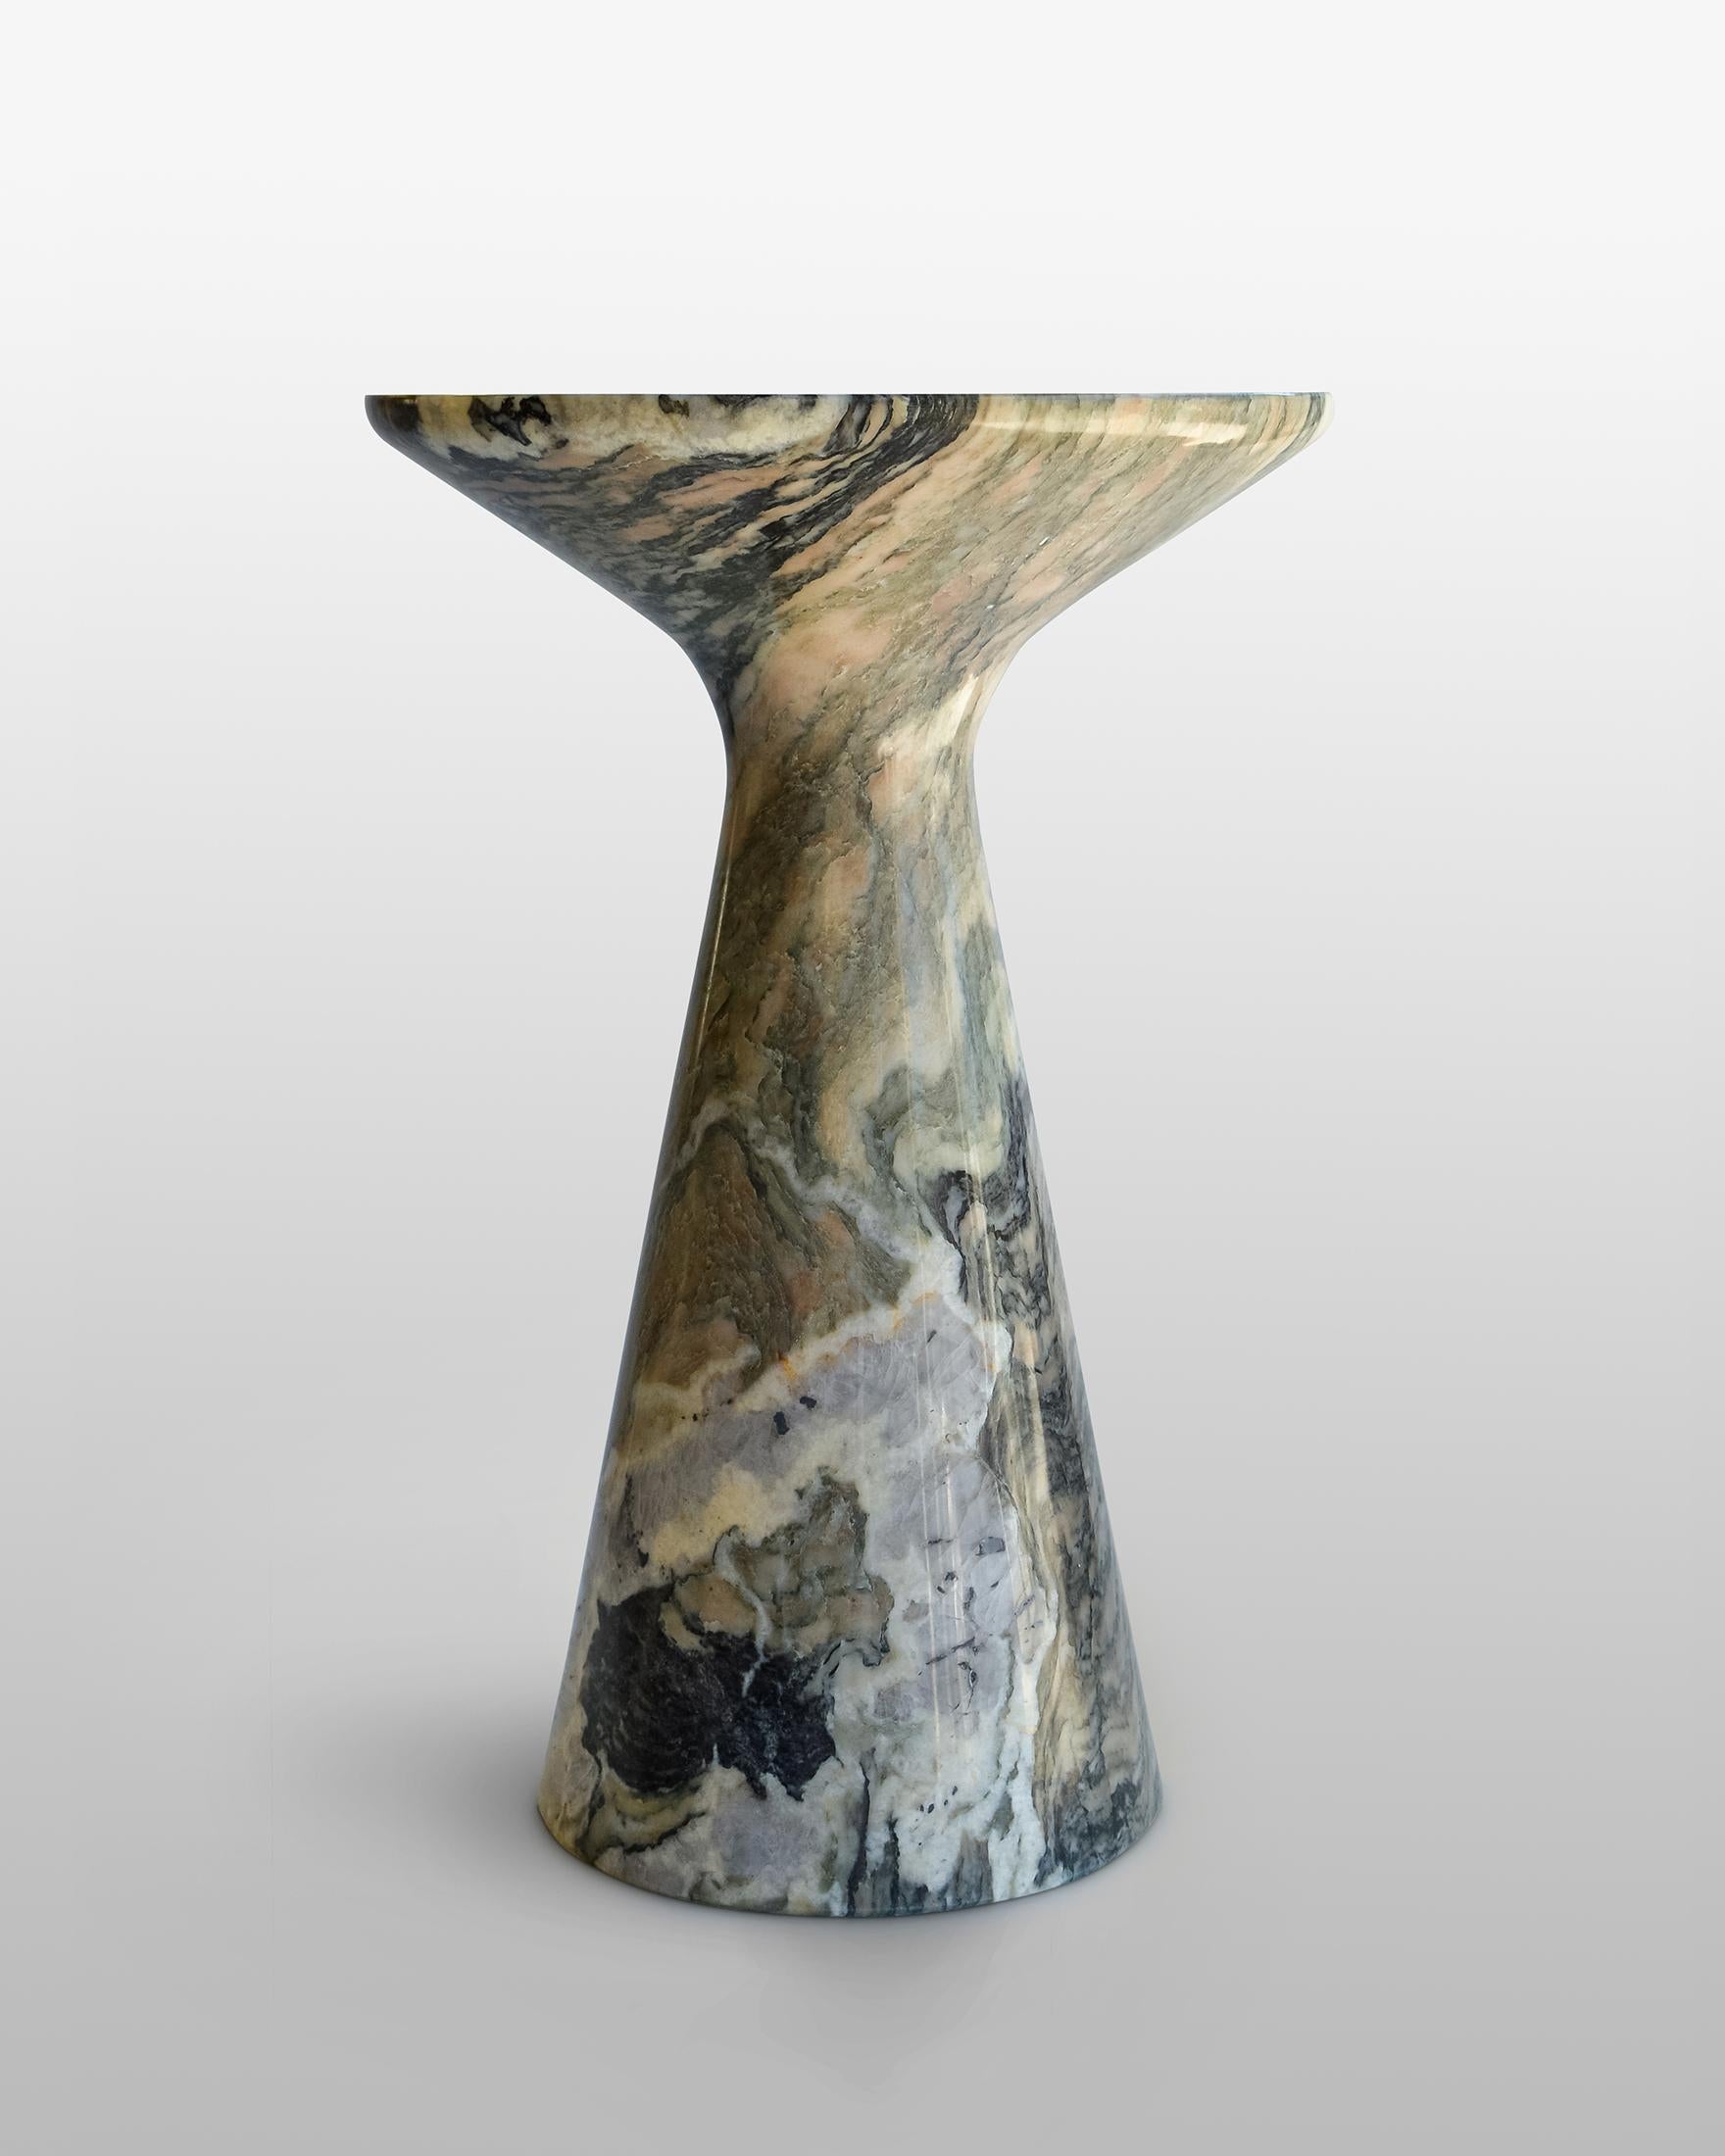 Pawn 1 Cipollino Marble Side Table & Stool by Etamorph
Dimensions: Ø 30 x H 40 cm.
Materials: Cipollino Marble.

Available in different stone options. Also available in different shapes. Please contact us. 

ETAMORPH is a NYC-based design boutique